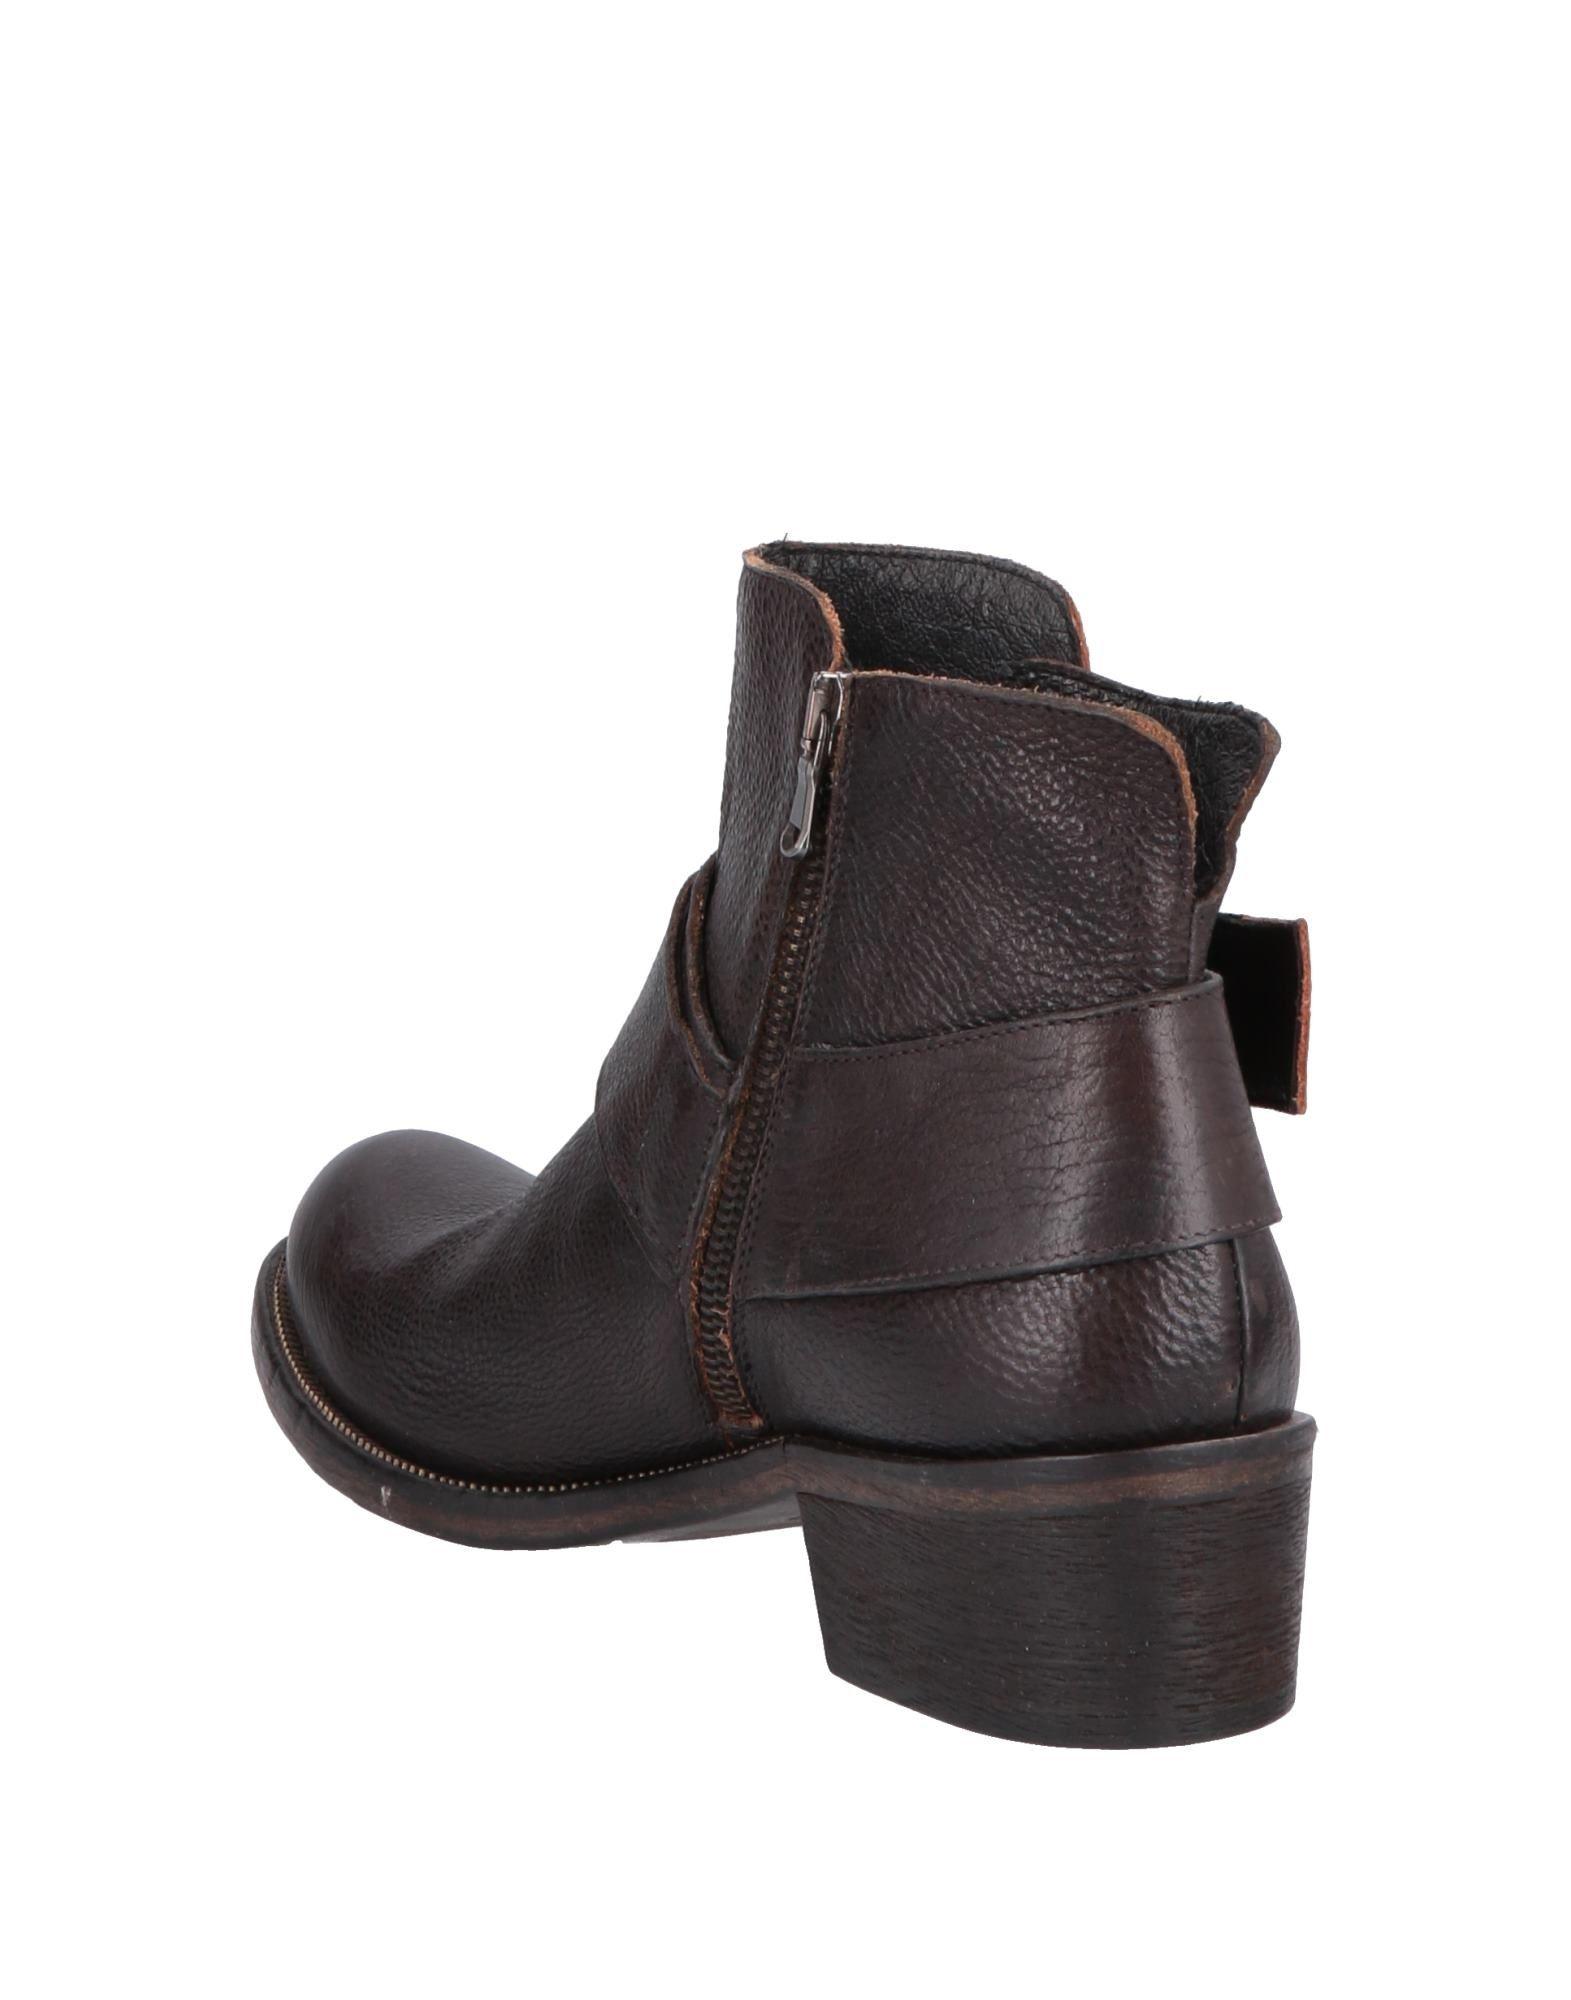 Manila Grace Leather Ankle Boots in Dark Brown (Brown) - Lyst